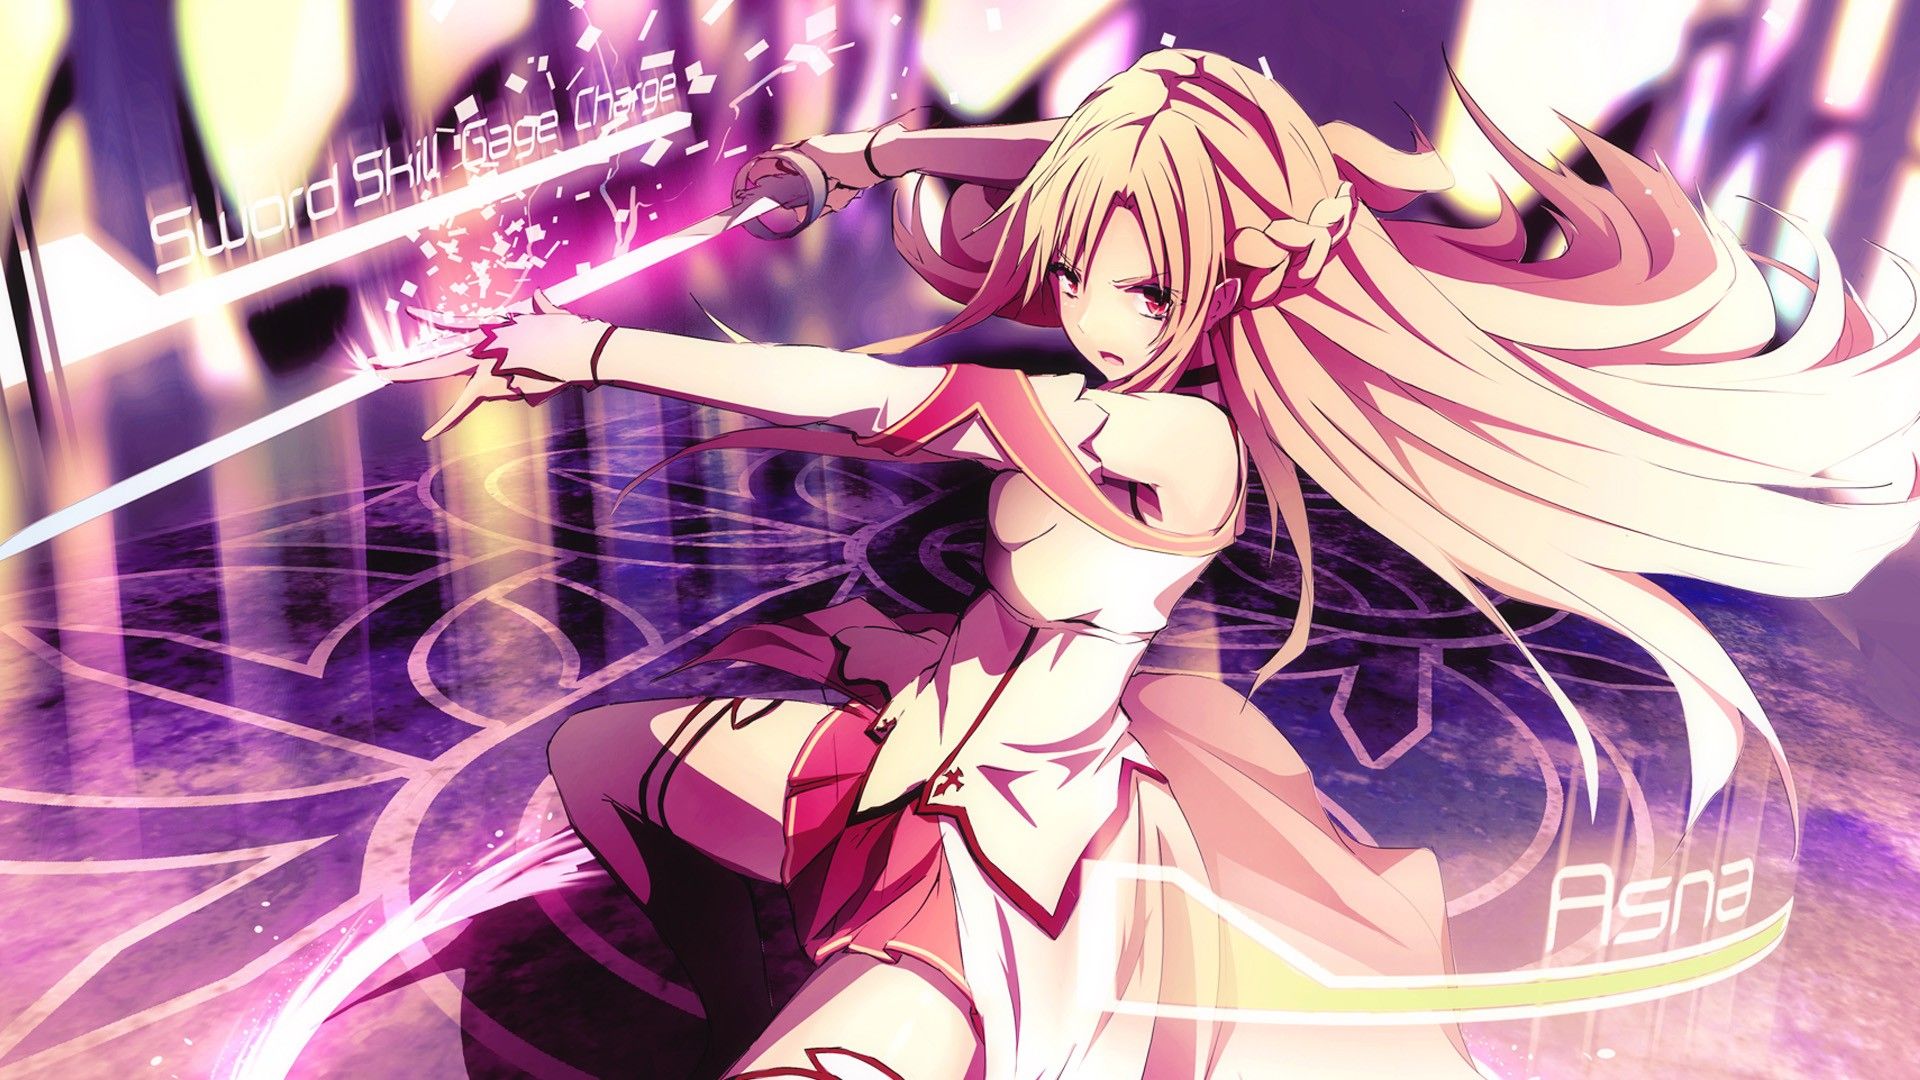 Sao wallpapers hd Gallery